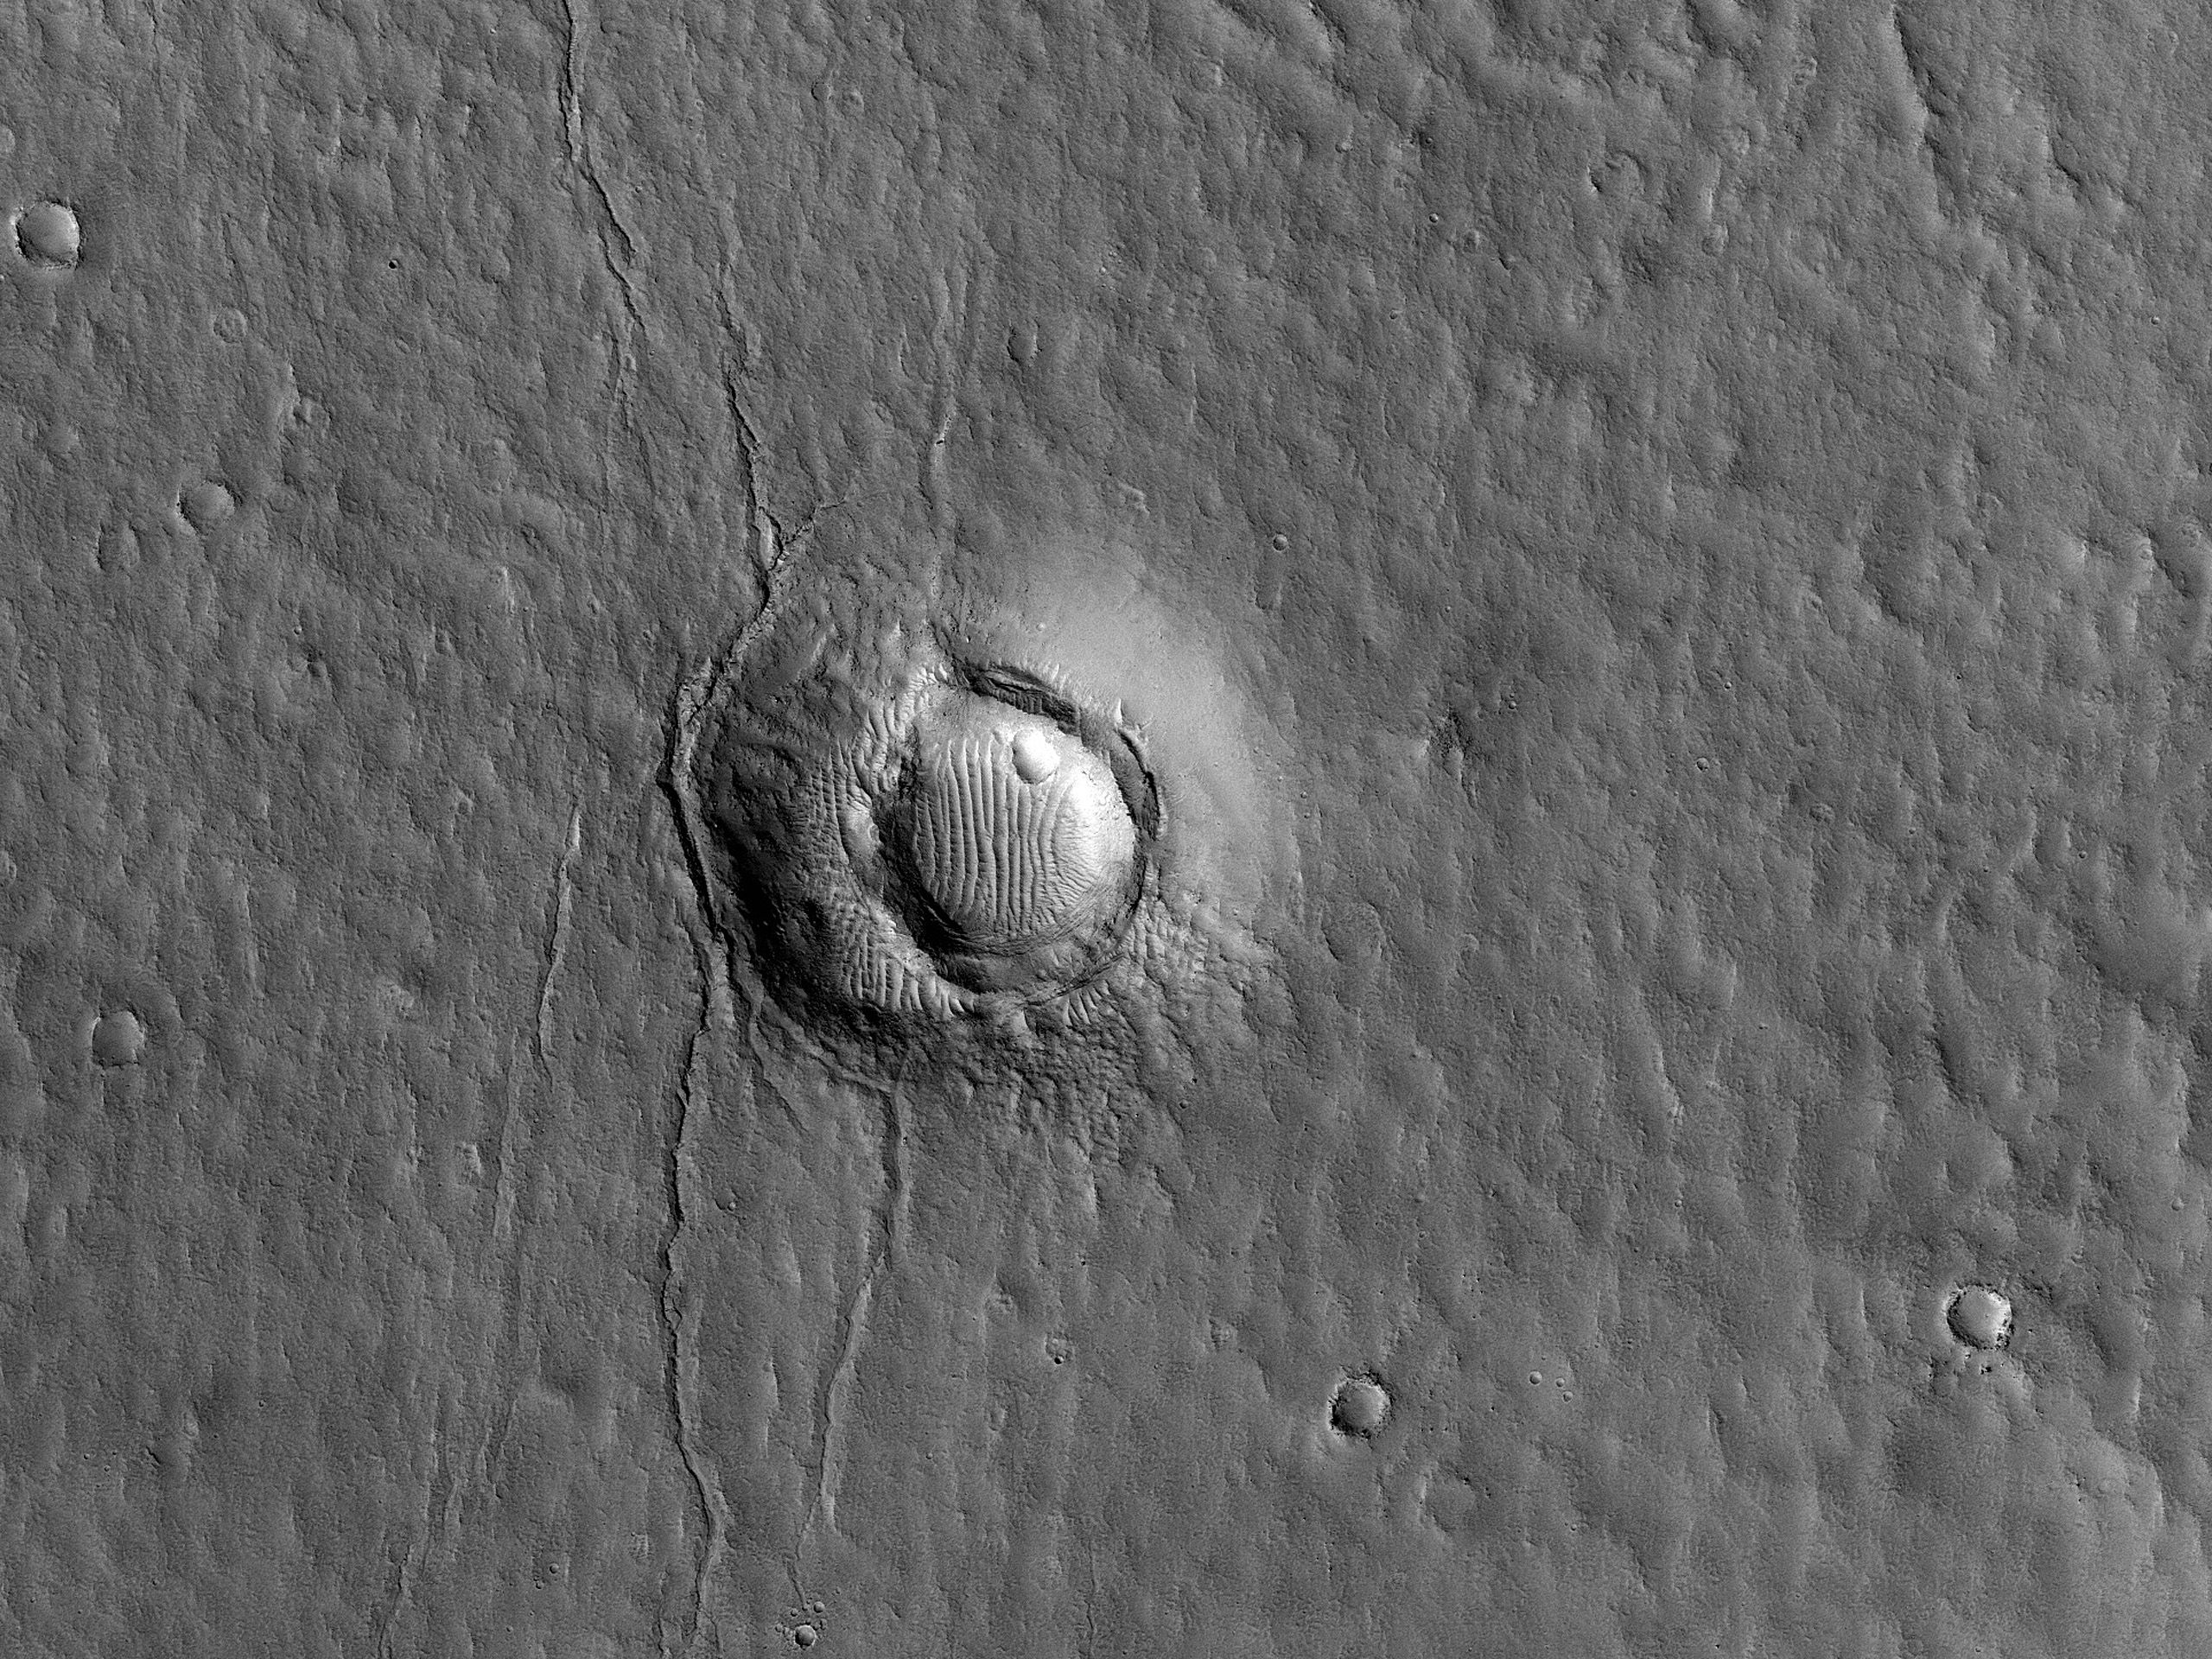 Thermally Anomalous Crater on Hrad Vallis Flow